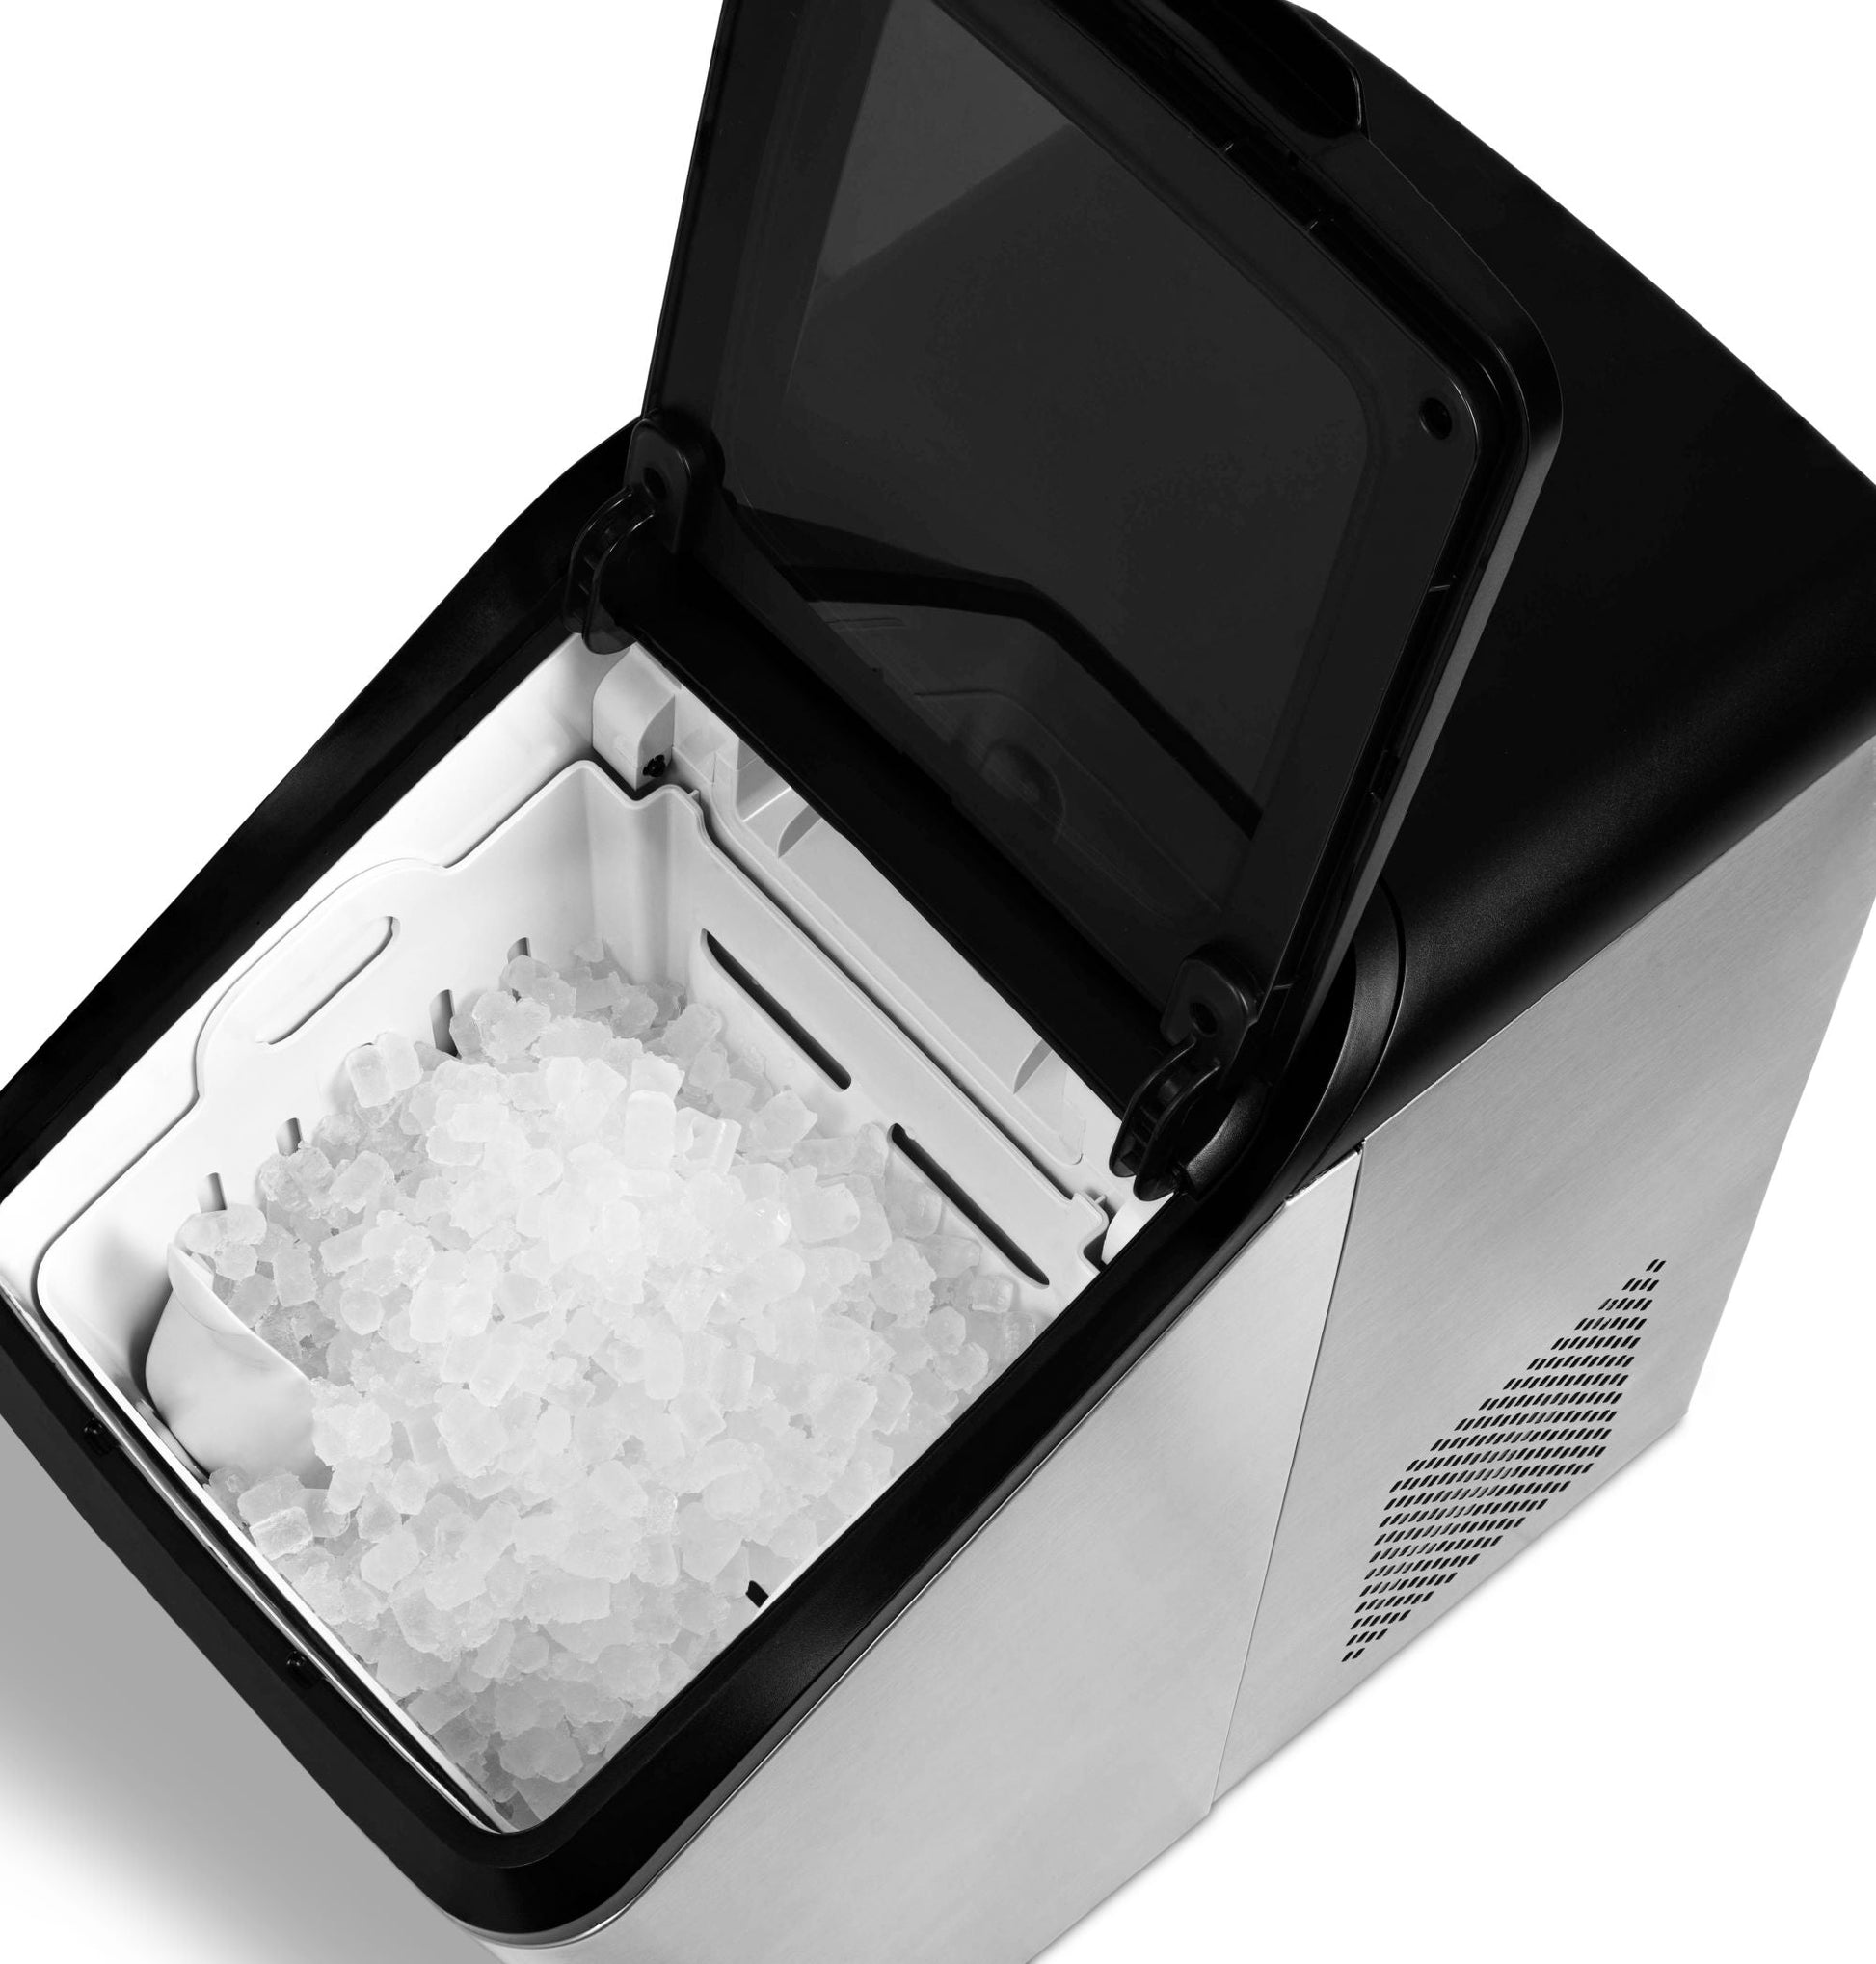 Newair 30 Lb. Countertop Nugget Ice Maker with Slim, Space-Saving Design, Self-Cleaning Function, Automatic Water Line and Refillable Water Tank, Perfect for Kitchens, Offices, Boats, and More